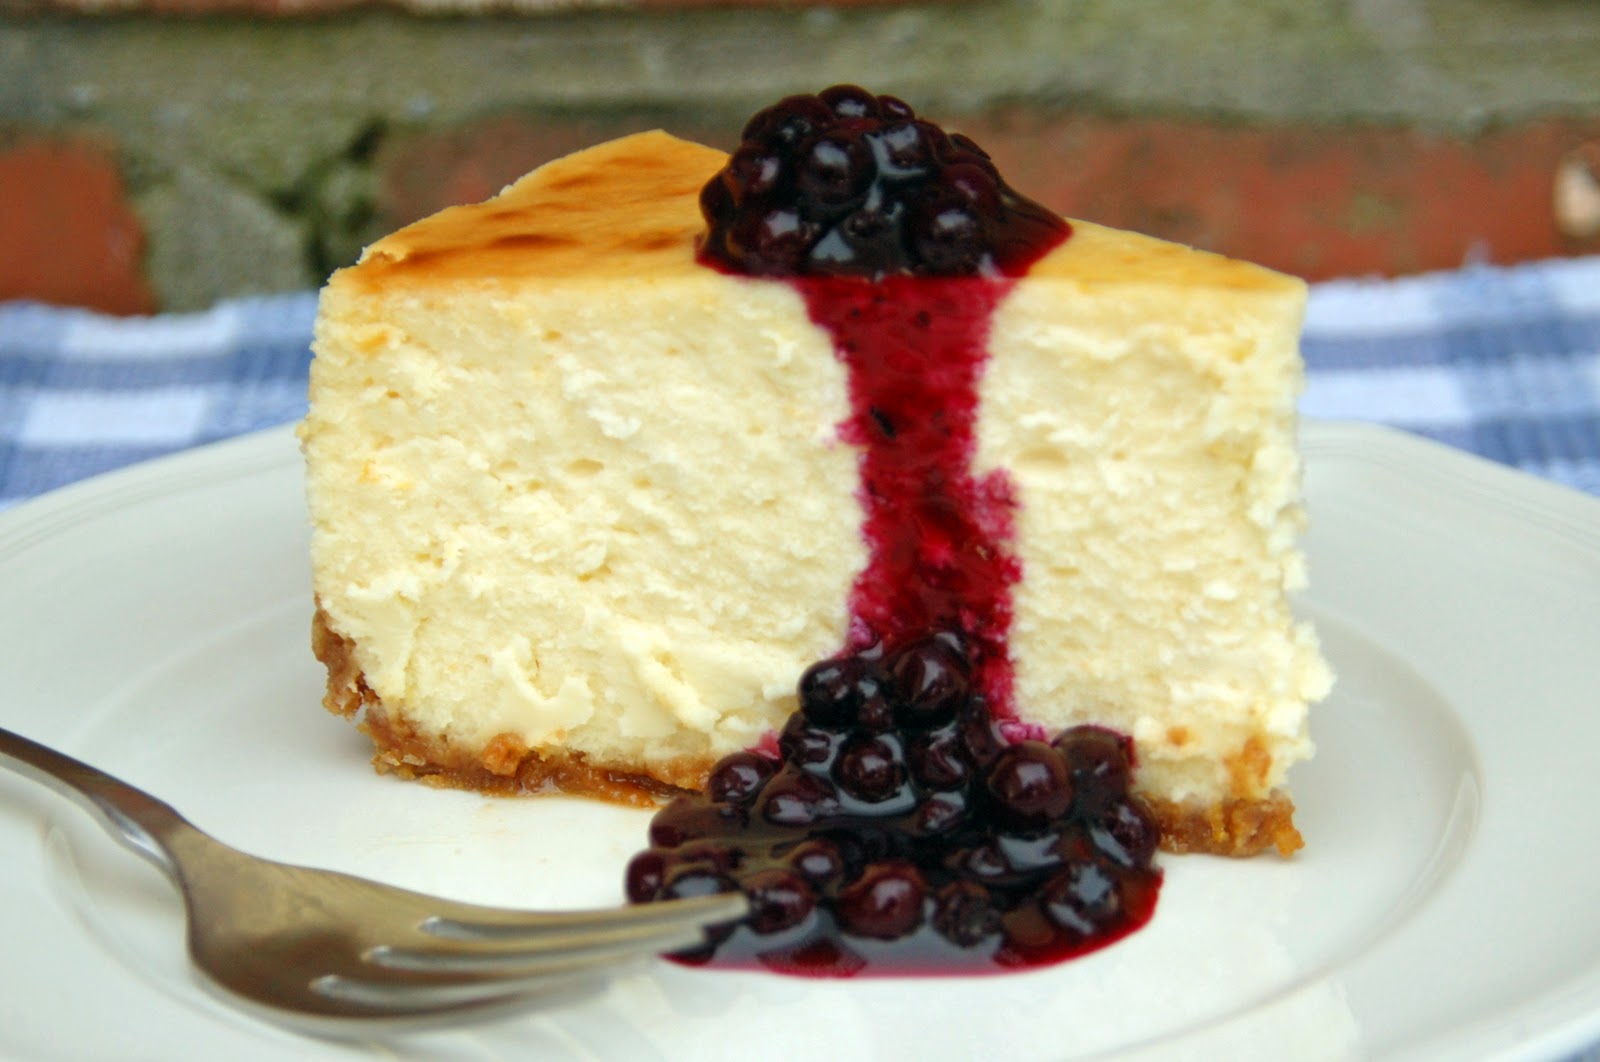 Southern Lady's Recipes: New York Cheesecake from Southern Lady's Recipes